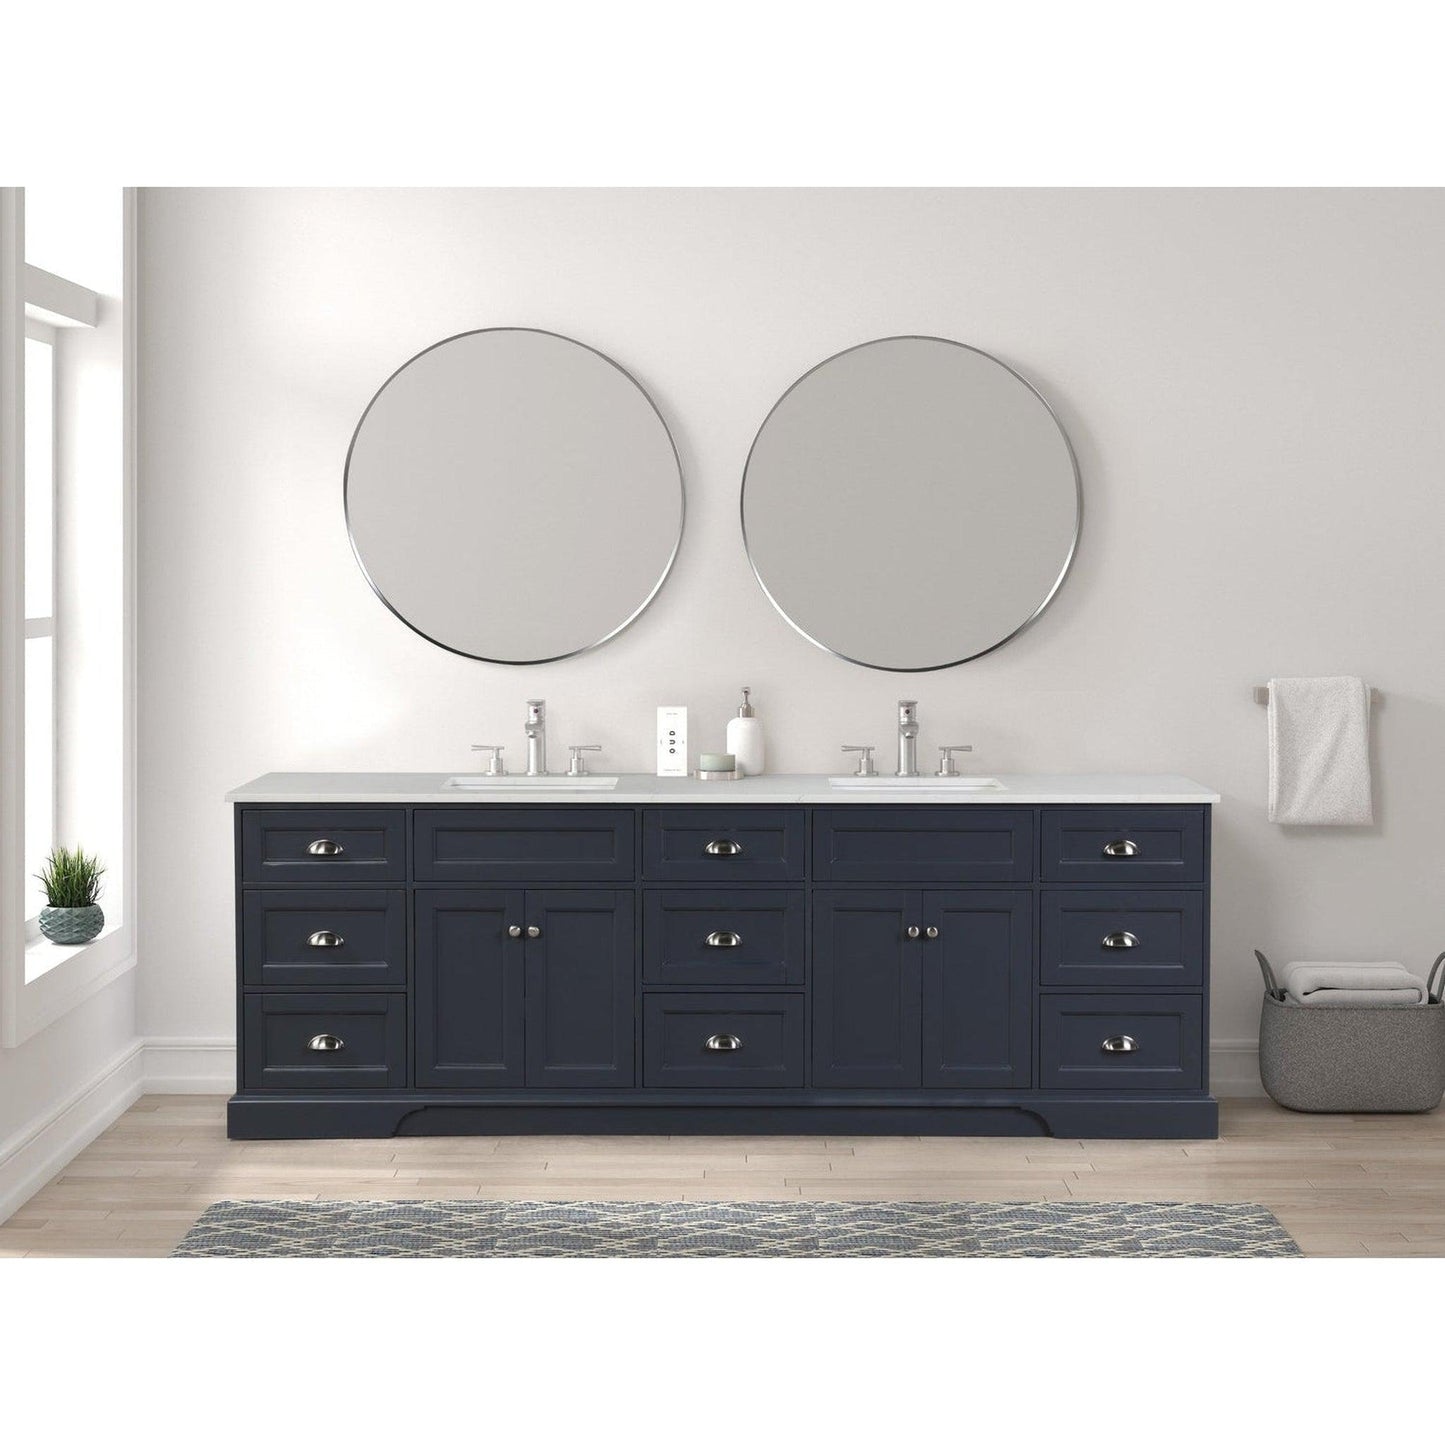 Eviva Epic 96" x 34" Charcoal Gray Freestanding Bathroom Vanity With Brushed Nickel Hardware and Quartz Countertop With Double Undermount Sink